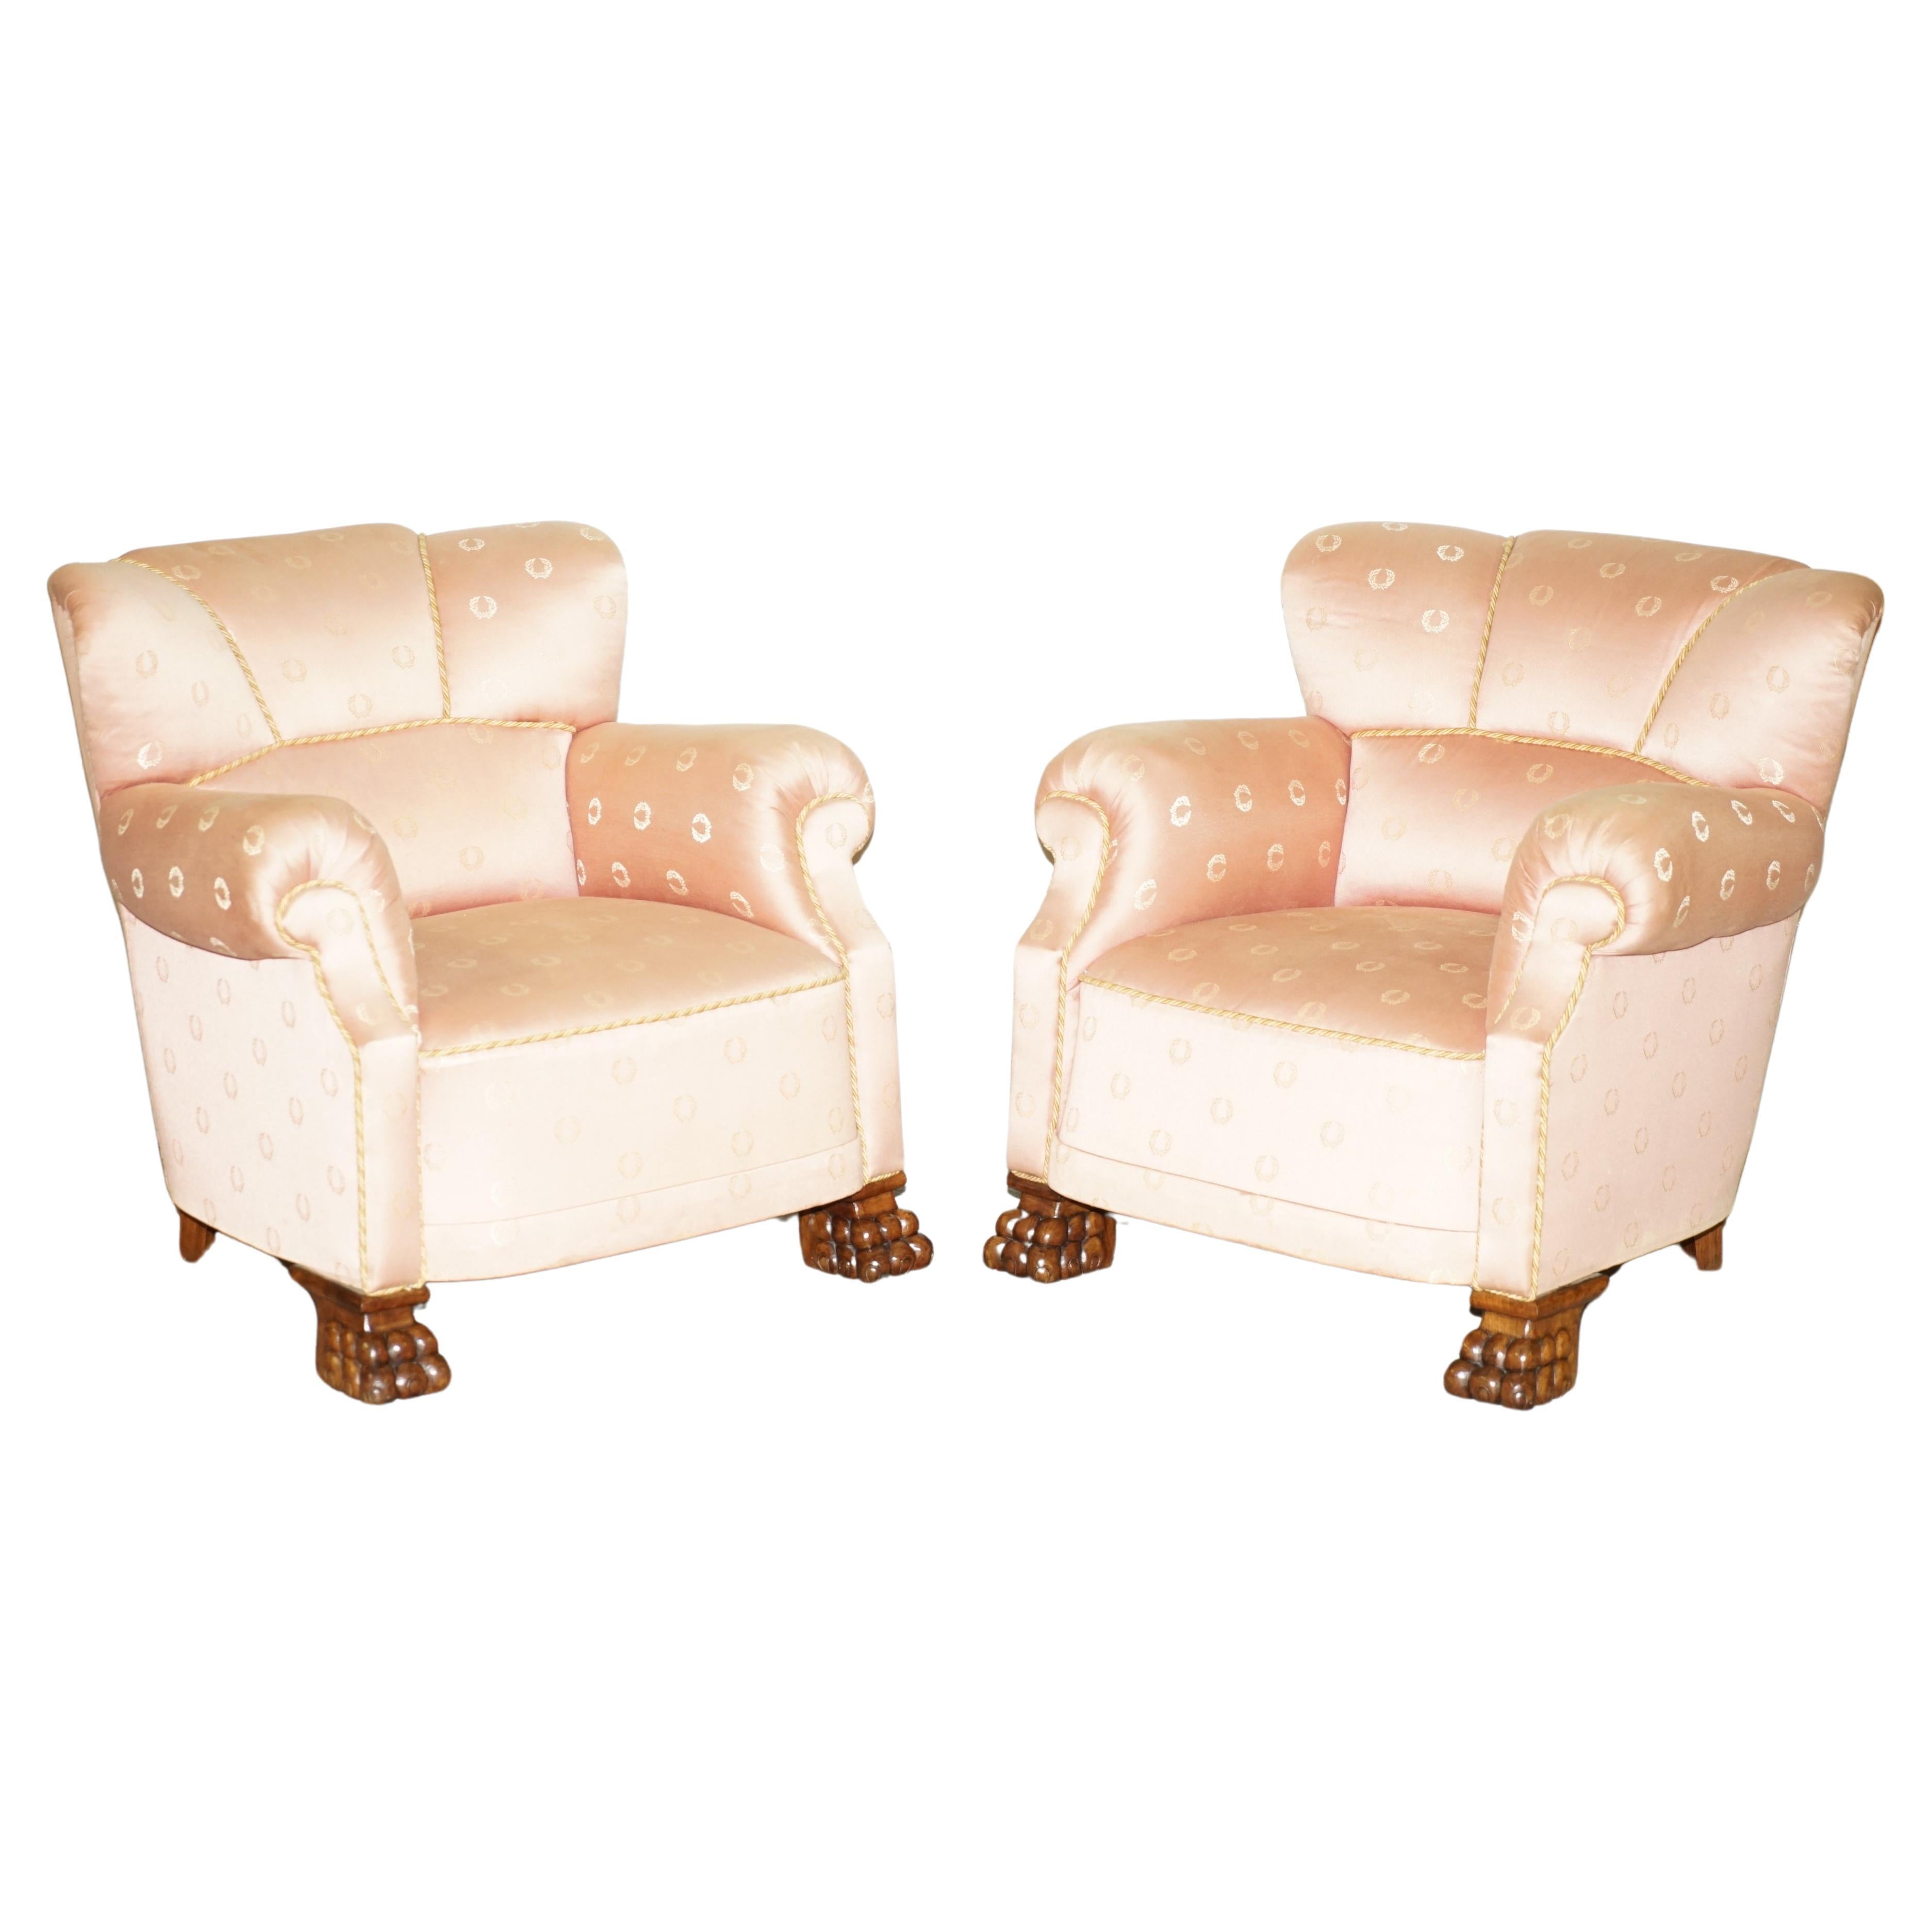 PAIR OF ANTIQUE ART DECO CIRCA 1920 LIONS HAIRY PAW CARVED FRENCH CLUB ARMCHAIRs